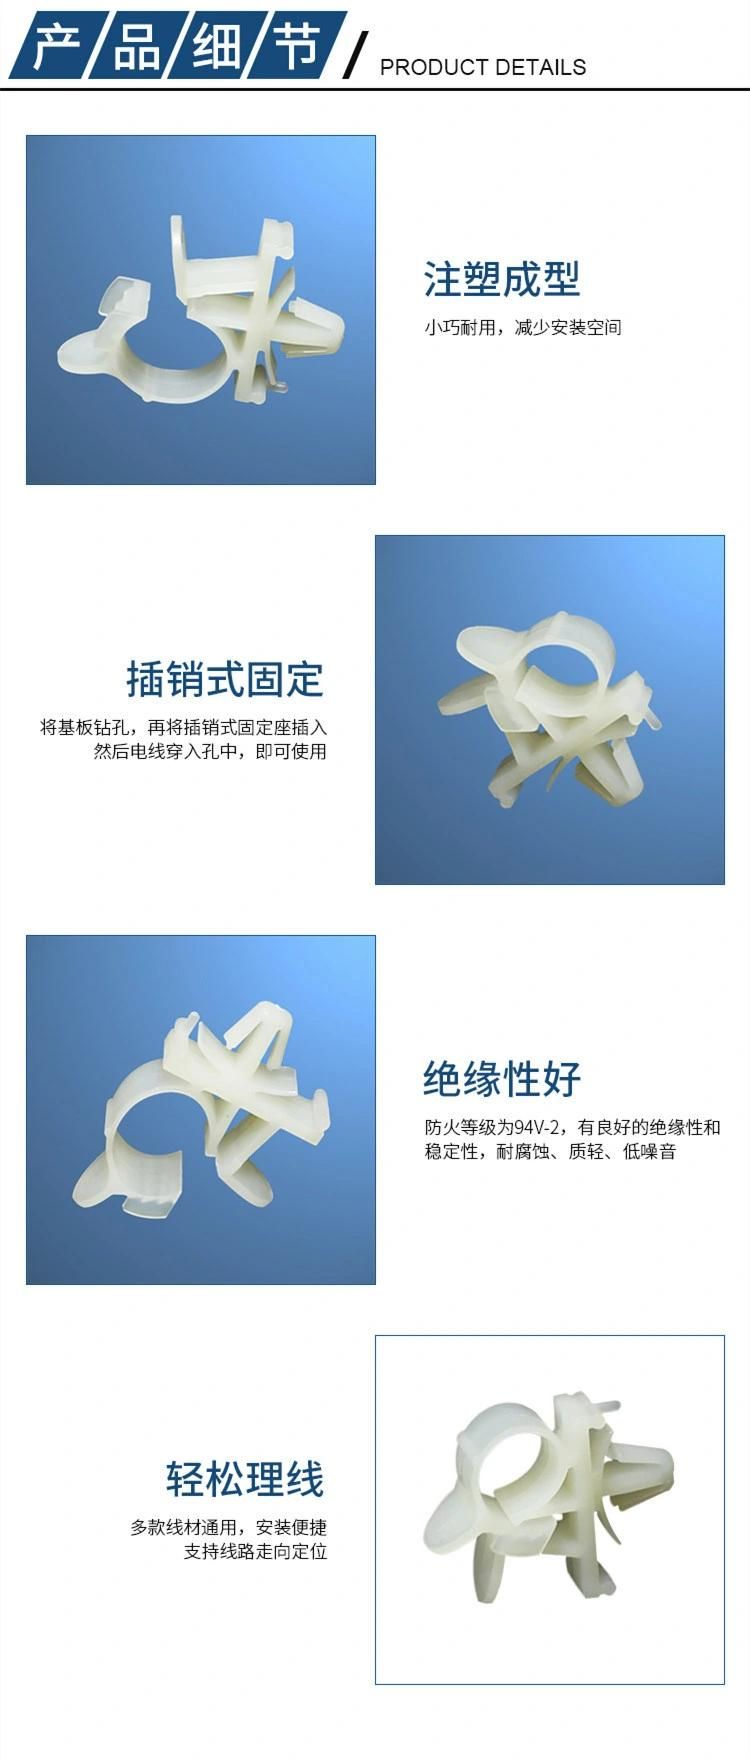 Cable Sticking Mount Adjustable Cable Fixing, Heyingcn Plastic Injection Clip Buckle Nylon Cable Clip